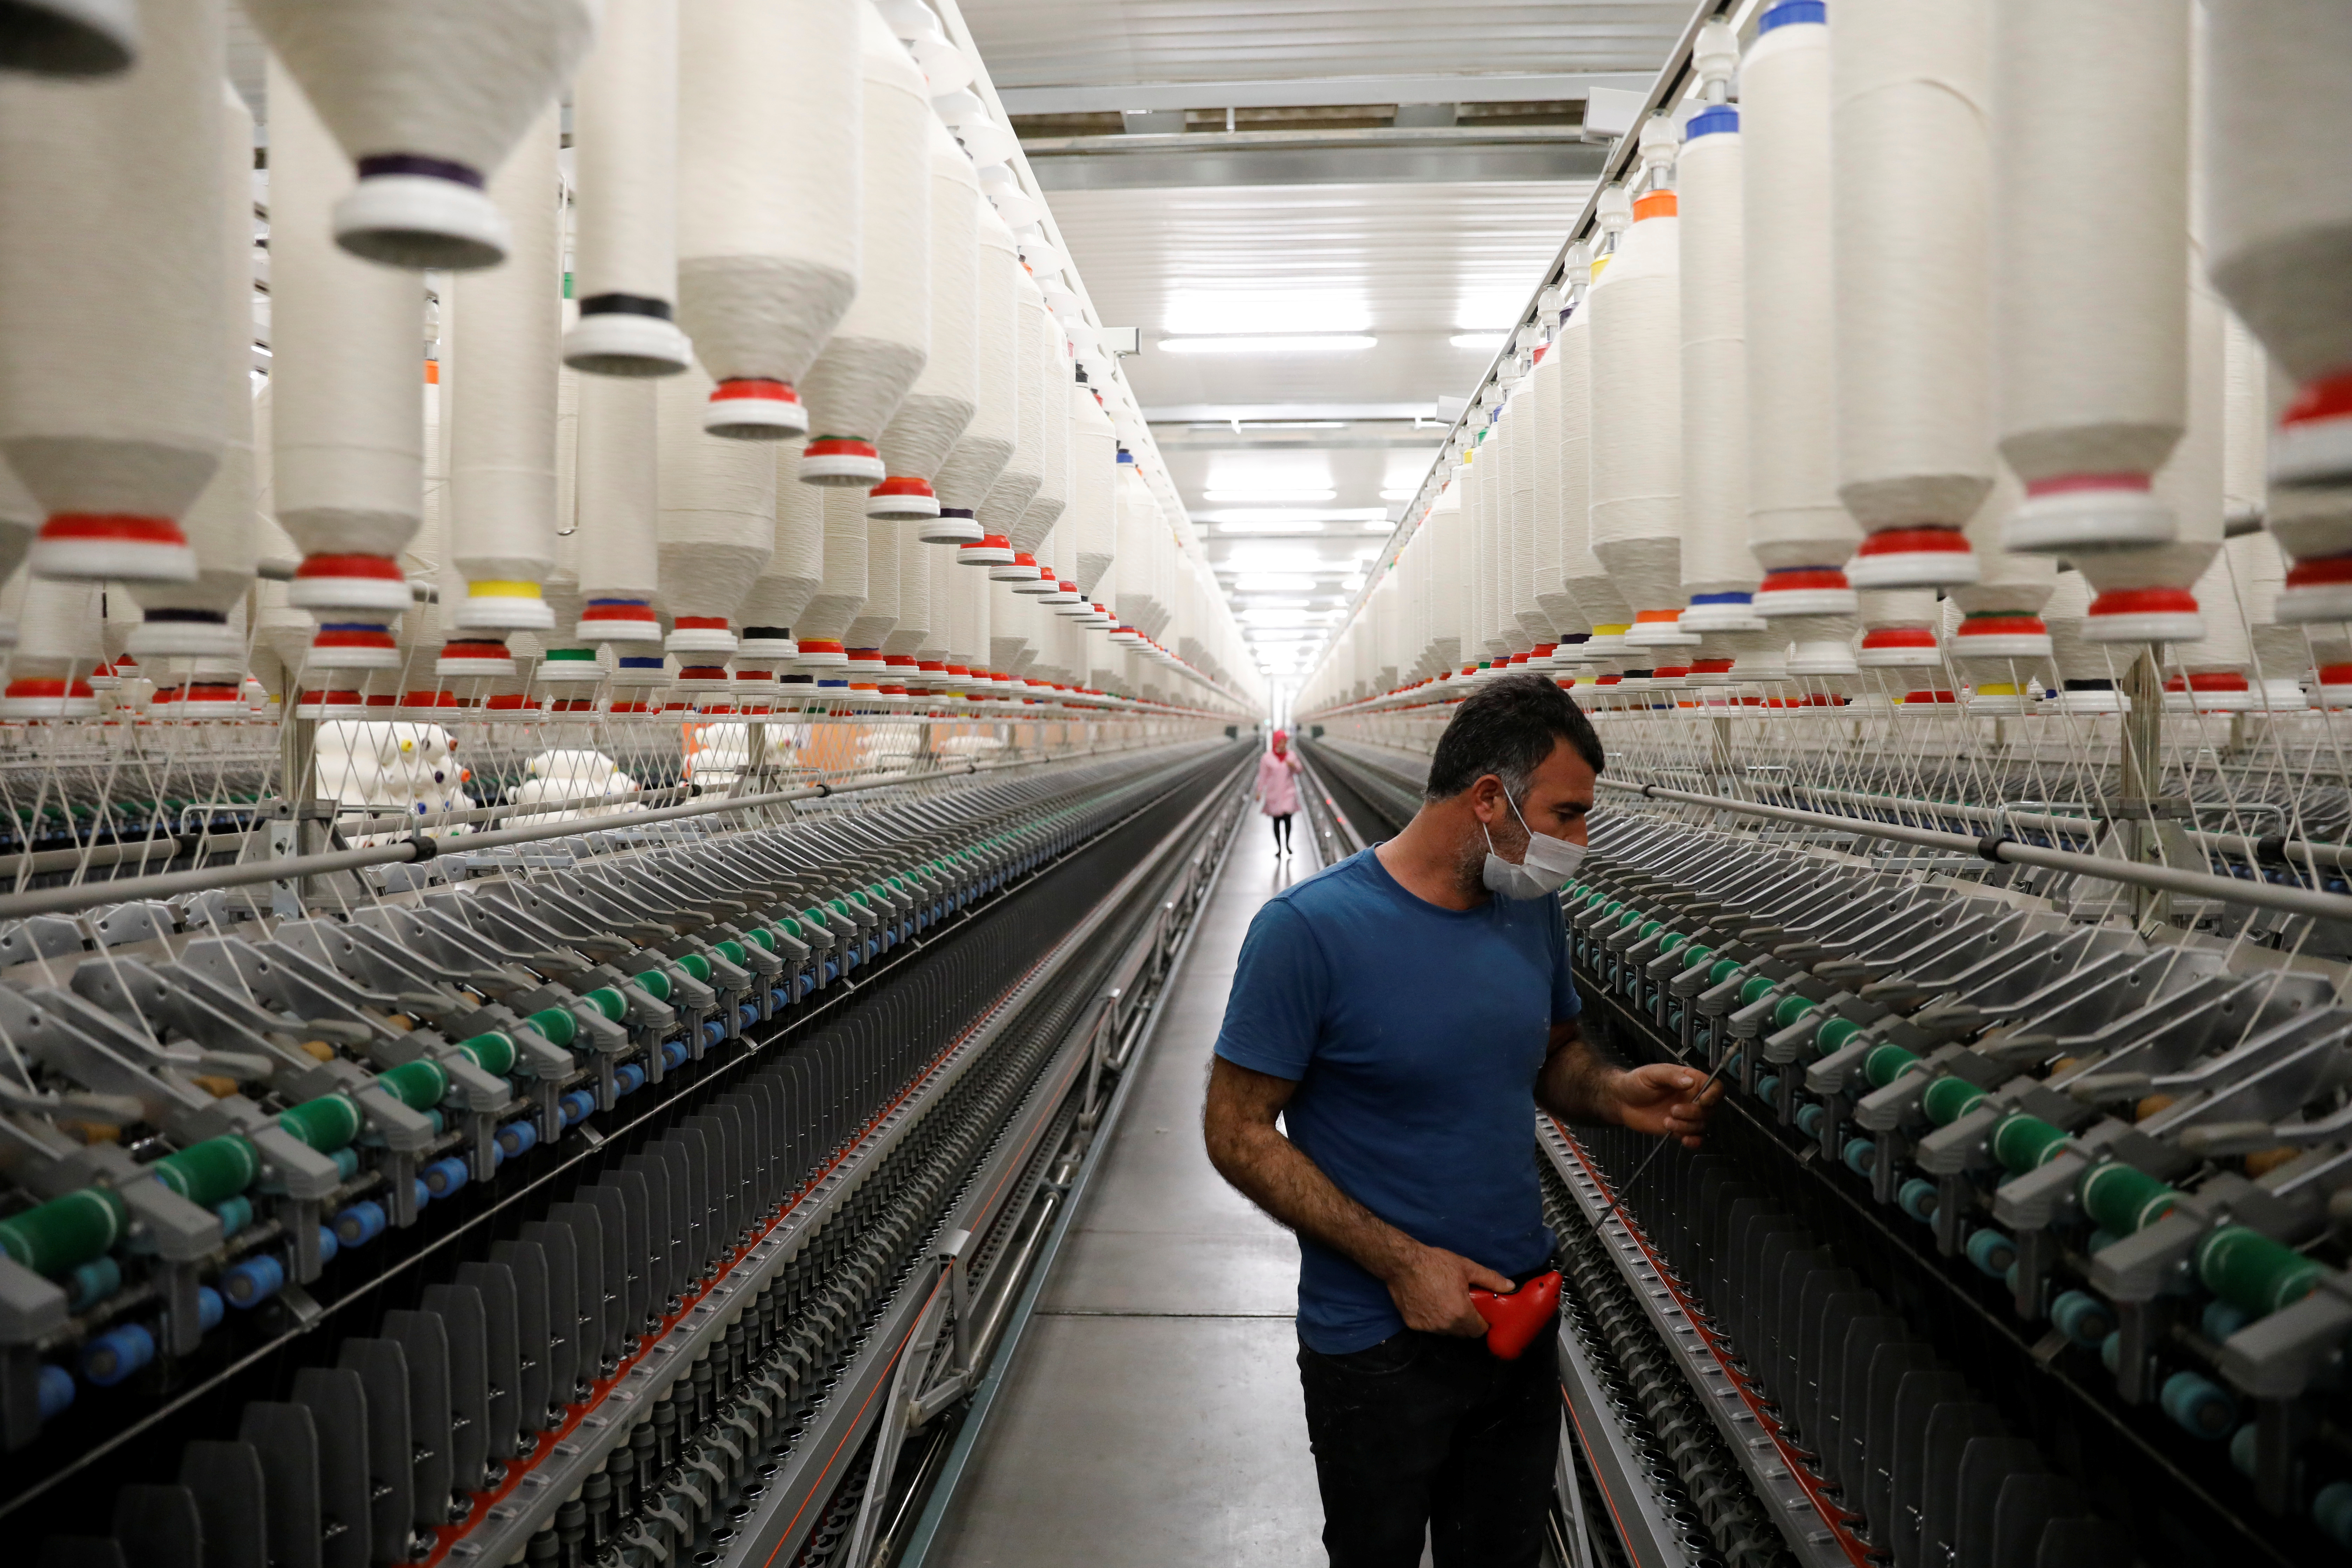 A worker makes a regular check on machines in a textile factory in Diyarbakir